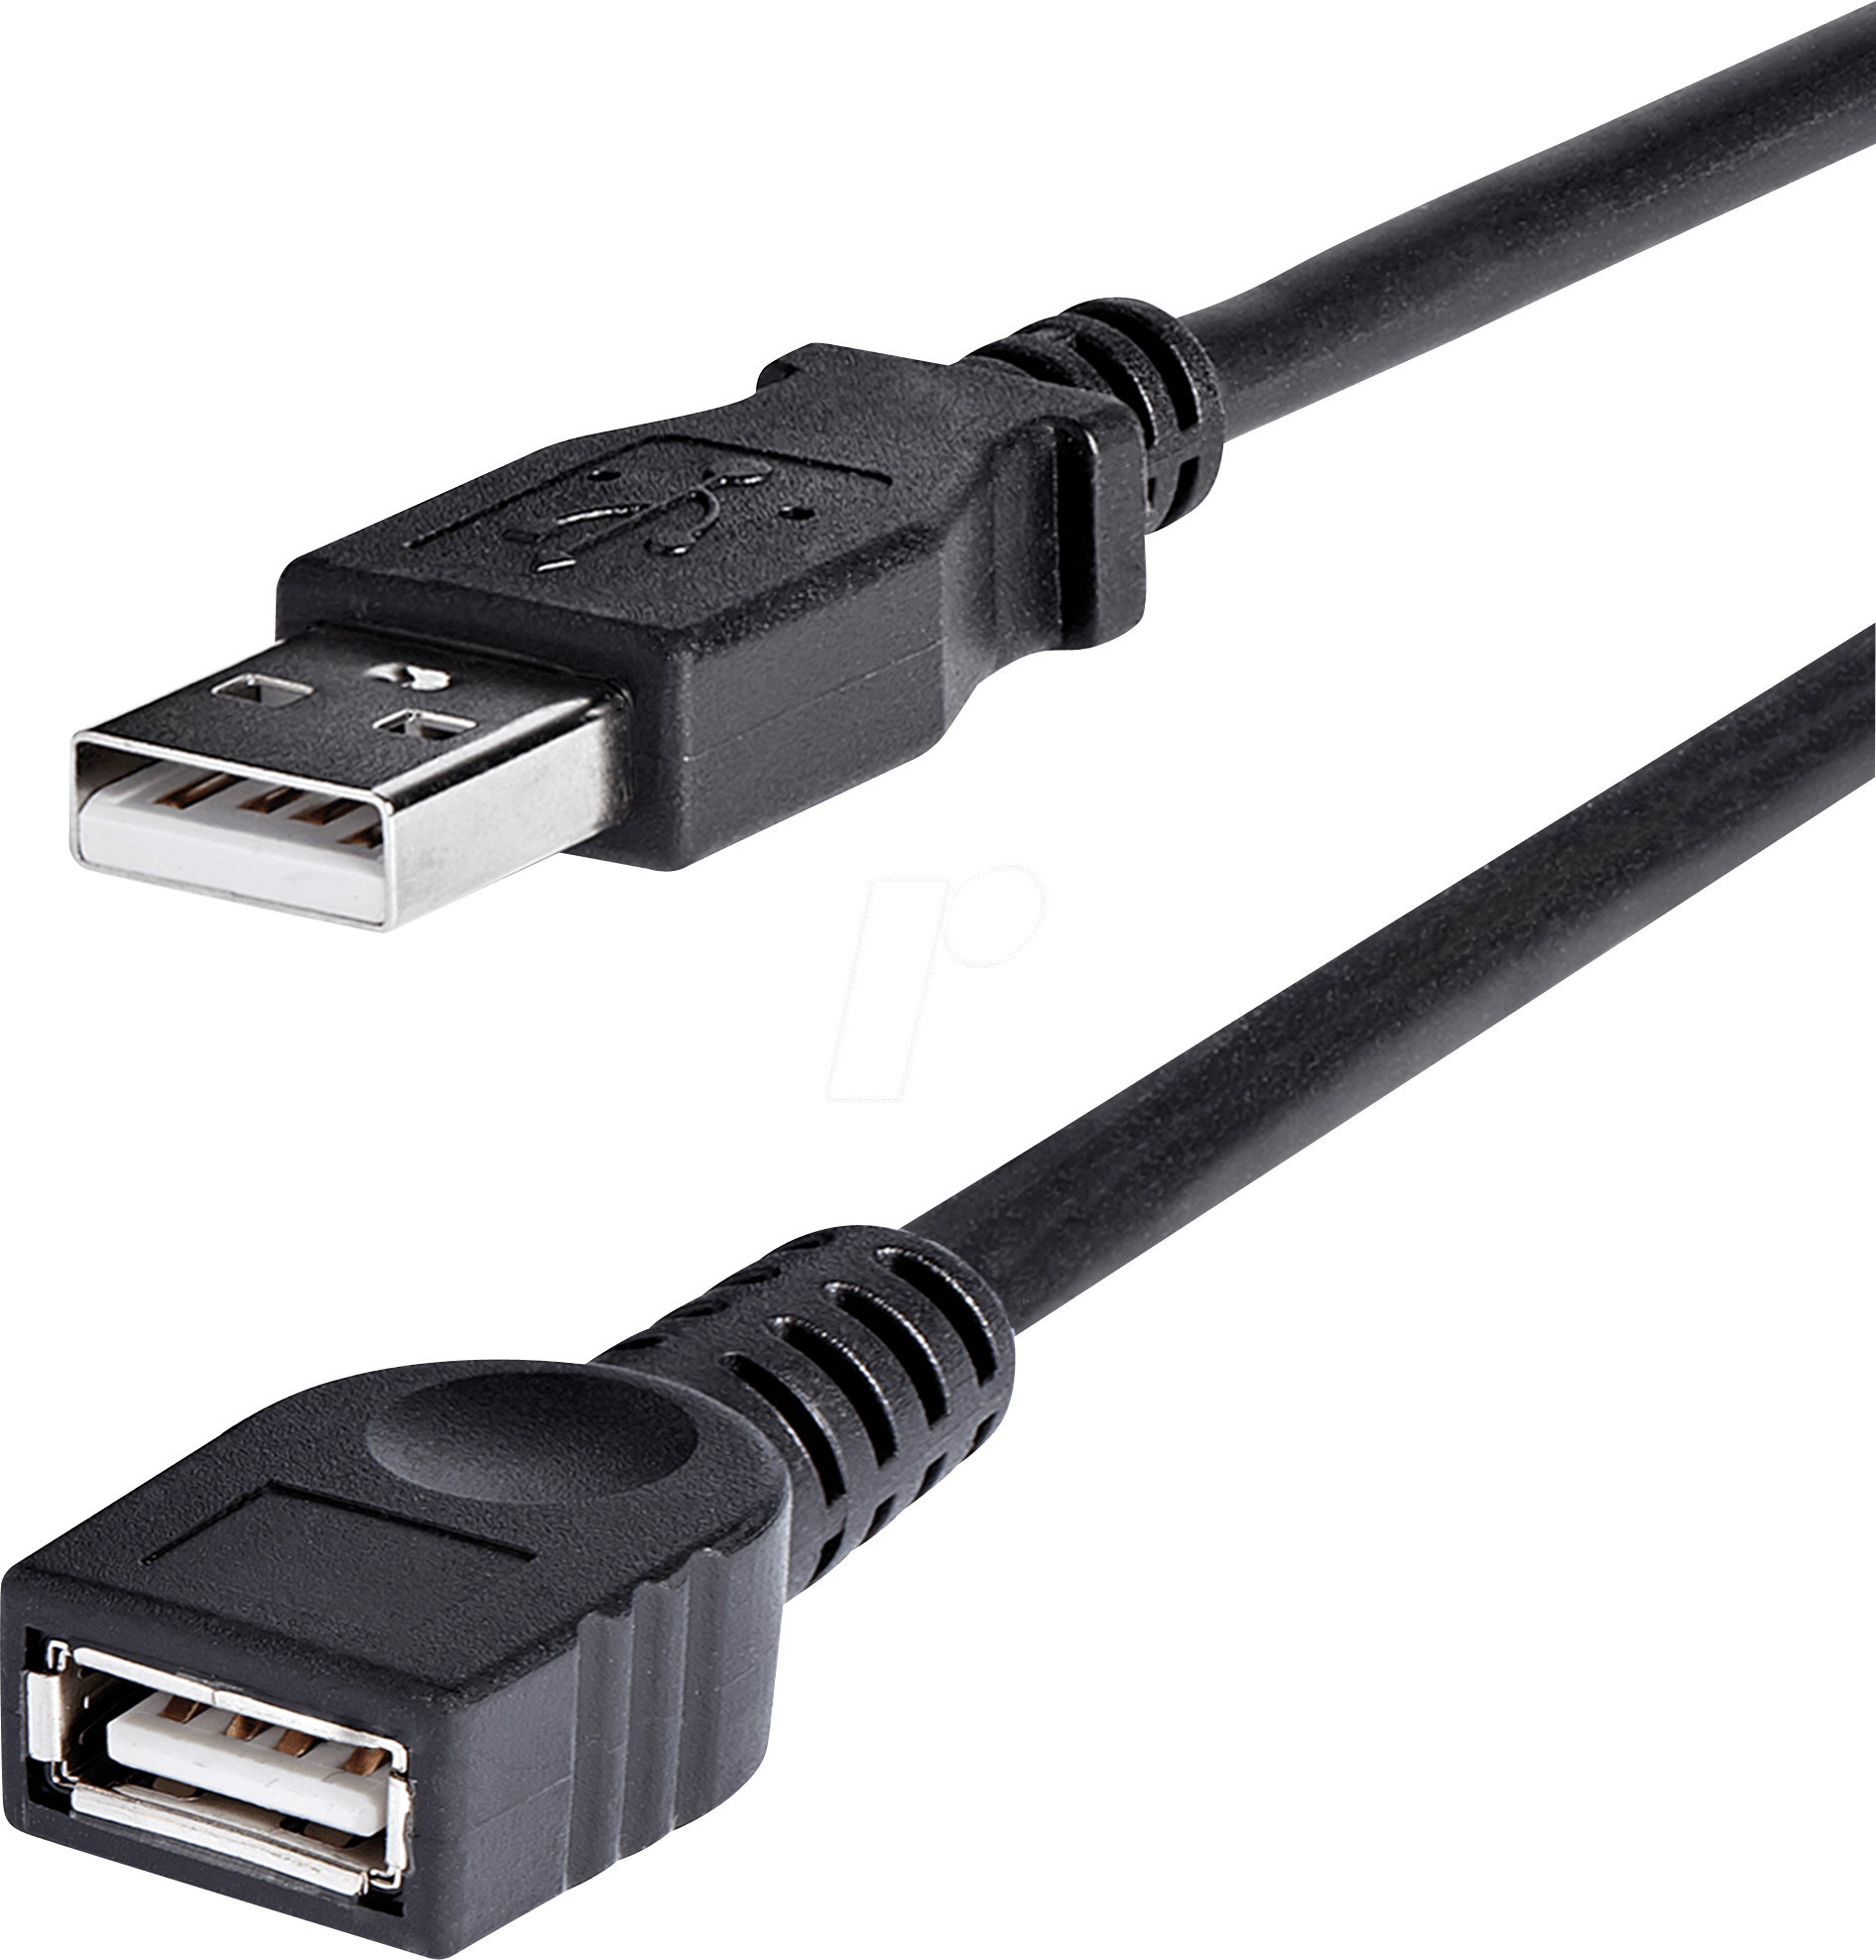 Black USB Extension Cable USB 3.0 2.0 Male to Female Data Sync Extender Cable FD 